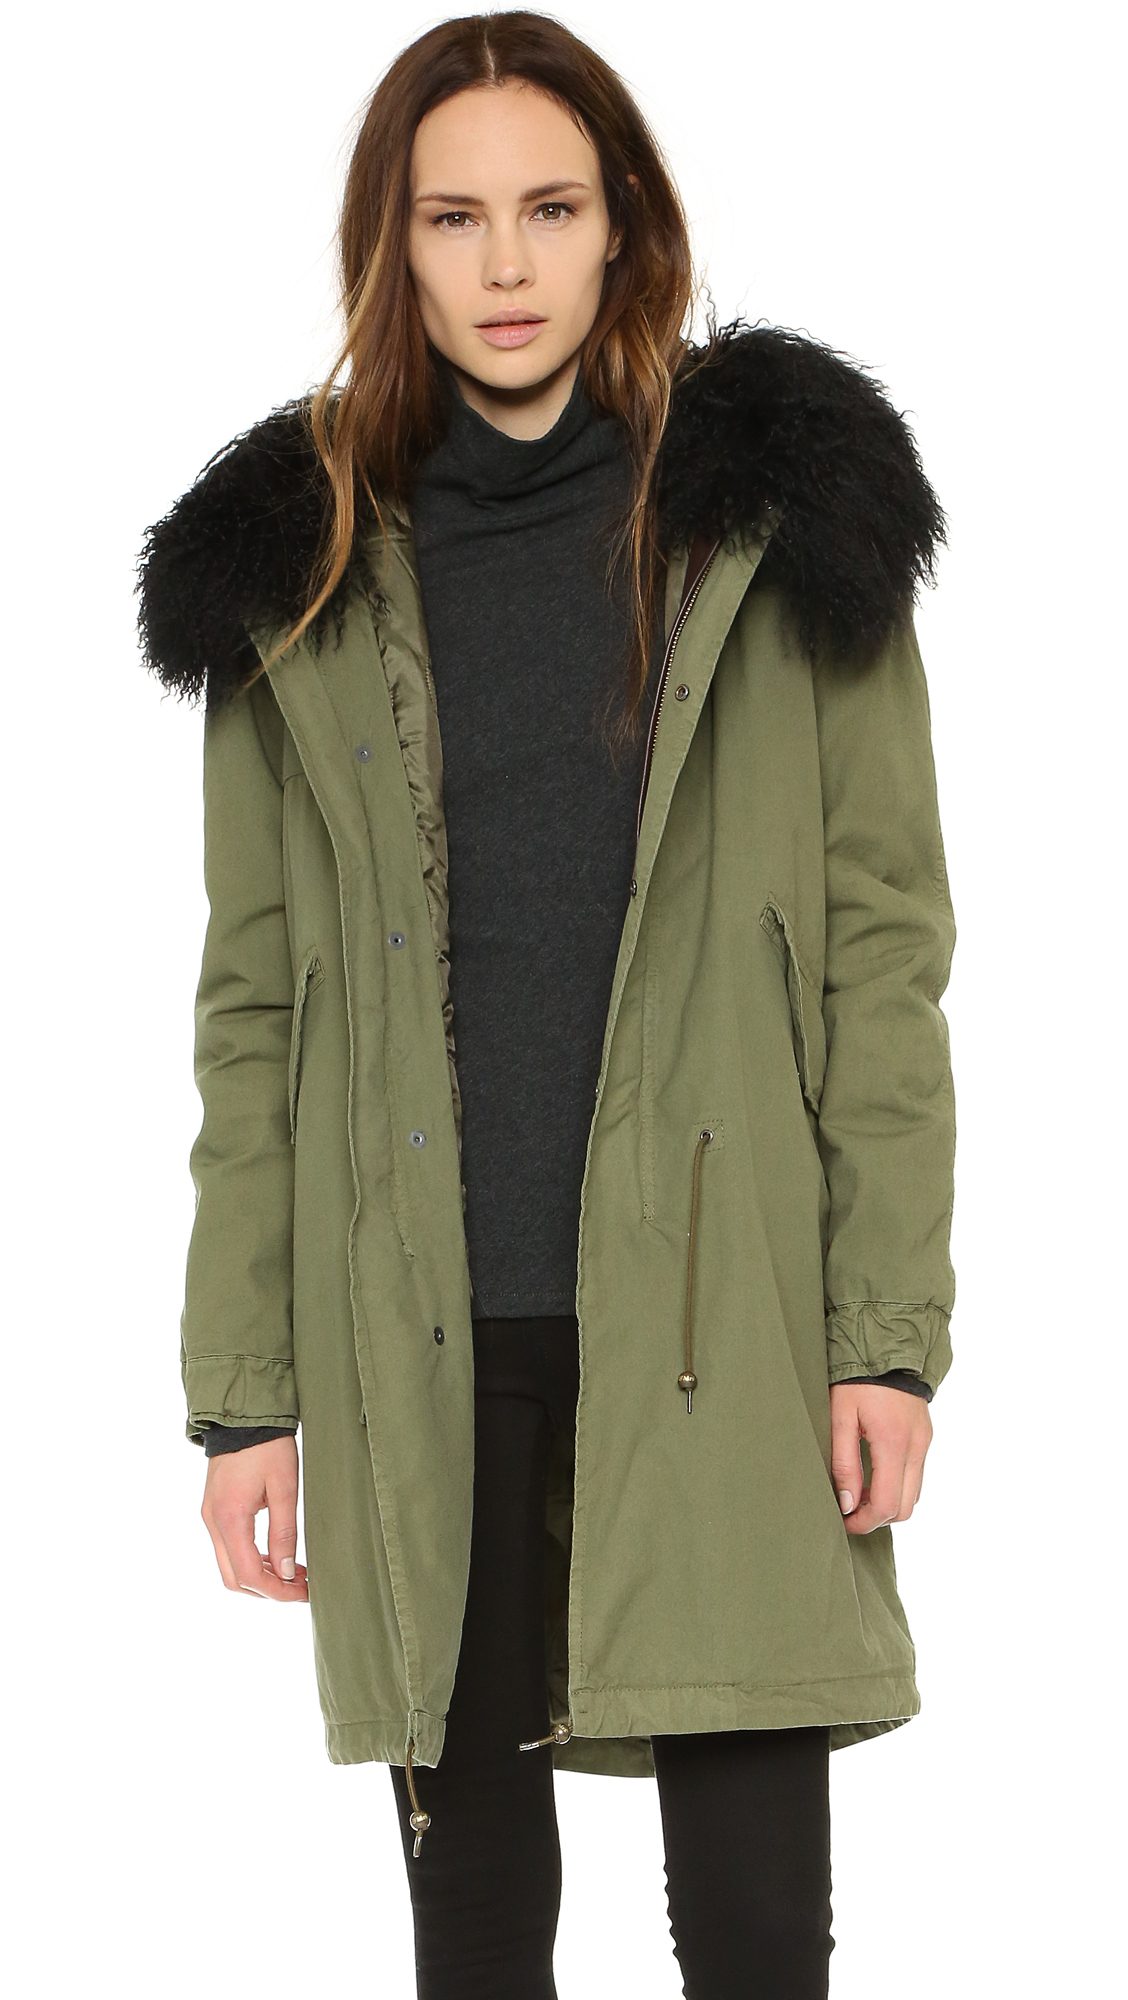 Mr & Mrs Italy Army Parka With Fur Trim in Army/Black (Green) - Lyst